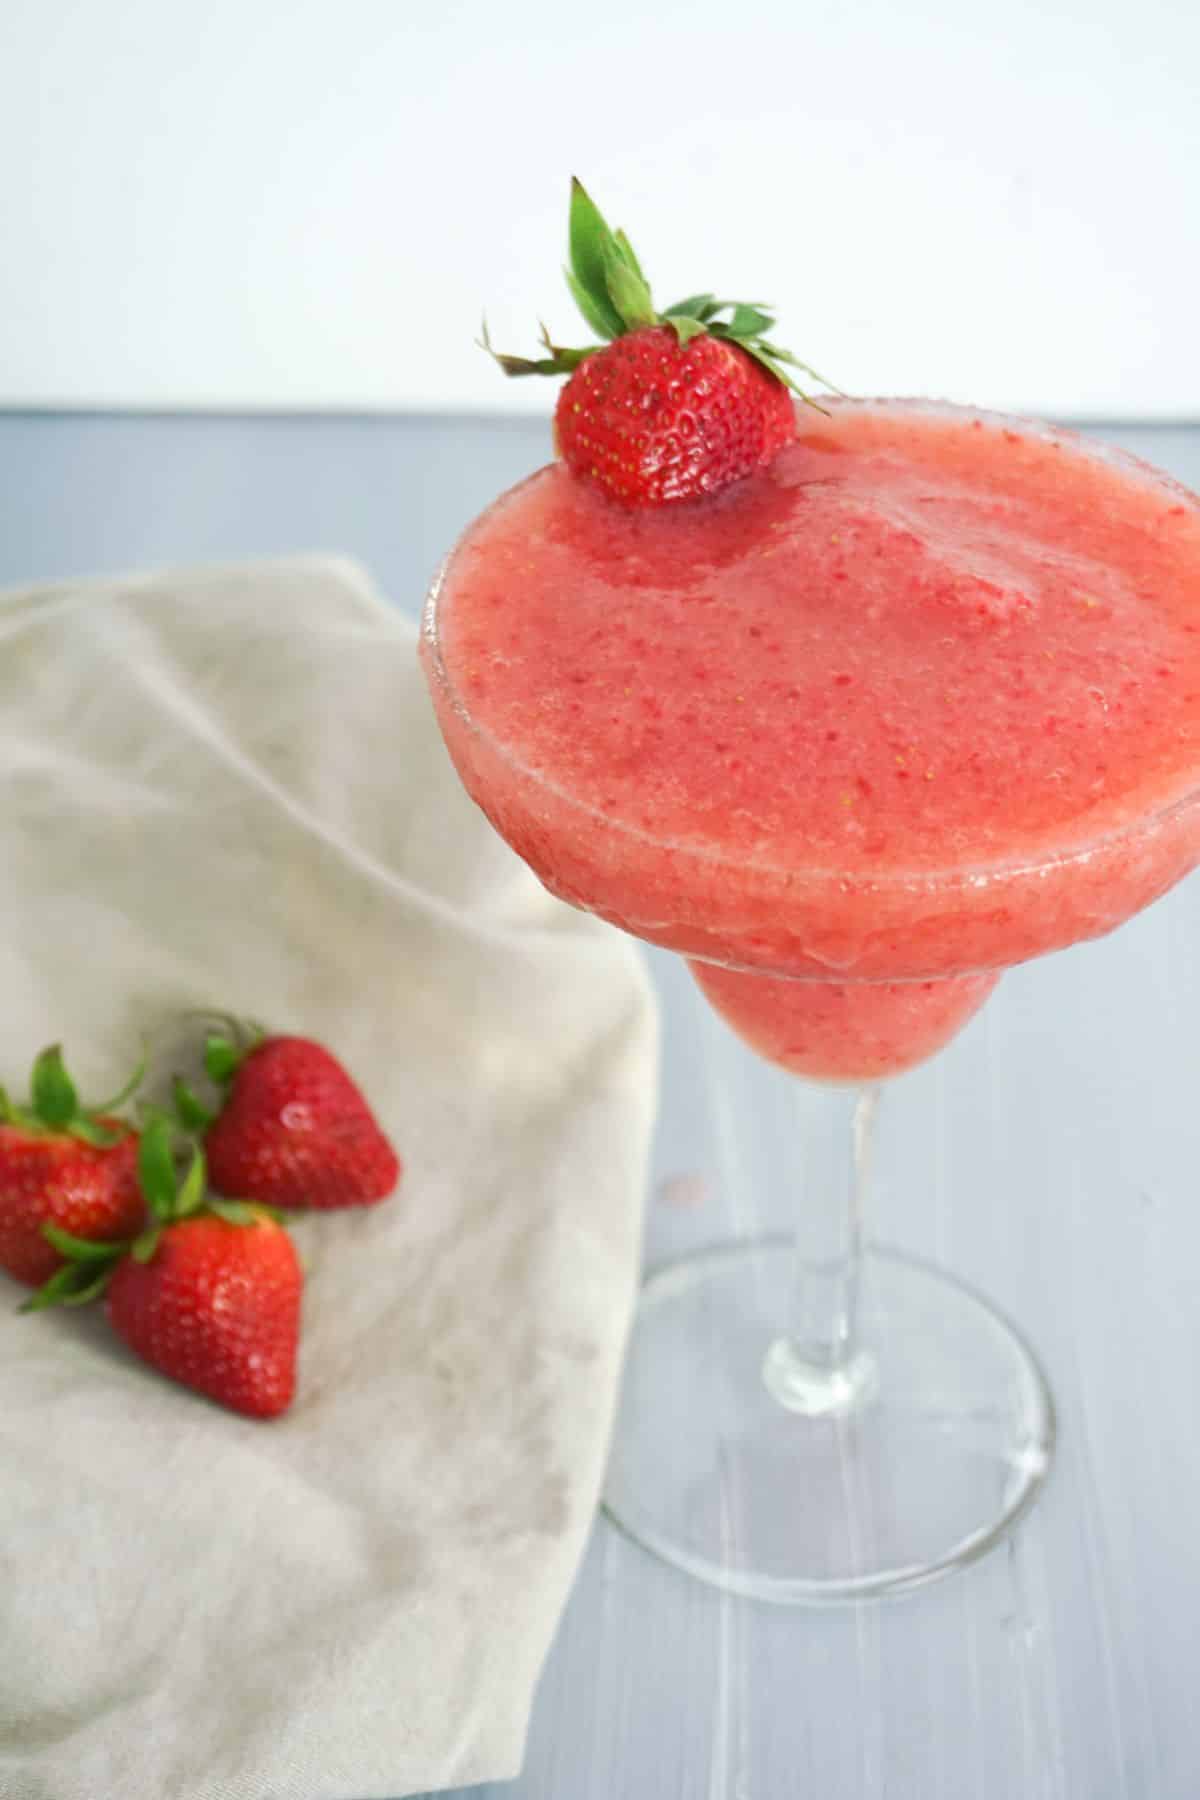 Strawberry Lemonade Margarita in a glass, garnished with strawberry.